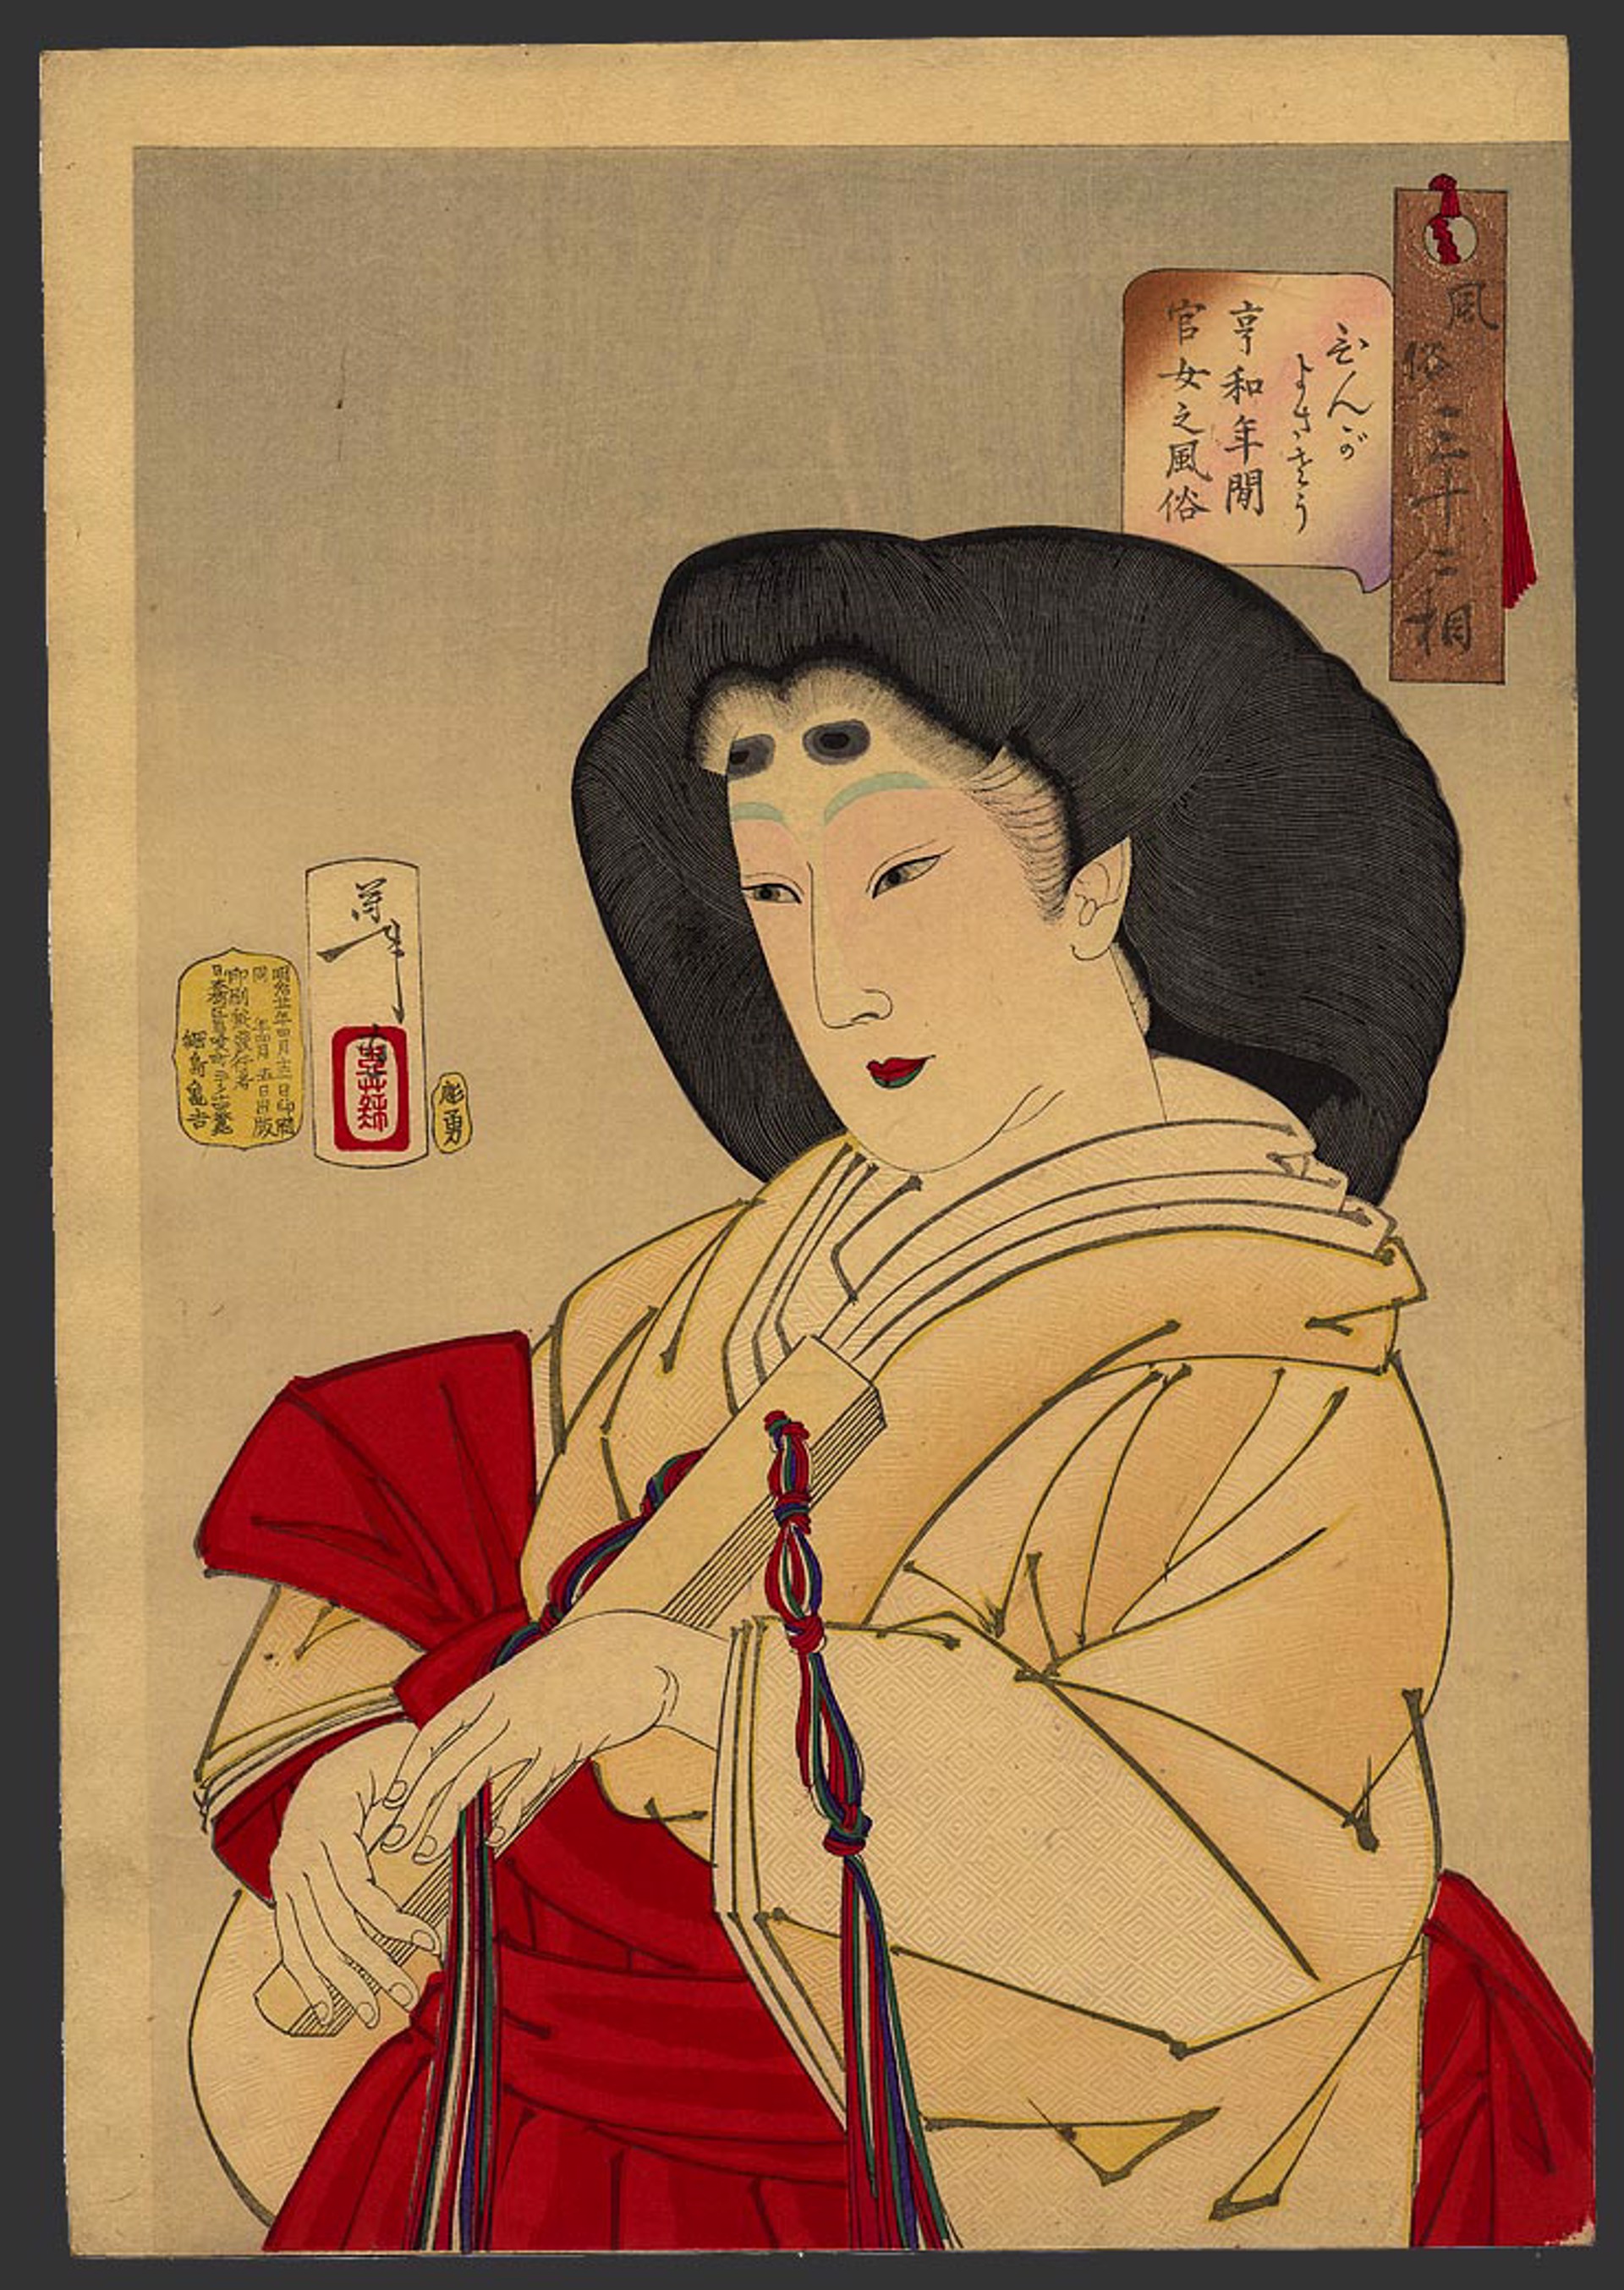 Looking refined: a court lady of the Kyowa era 32 Aspects of Women by Yoshitoshi